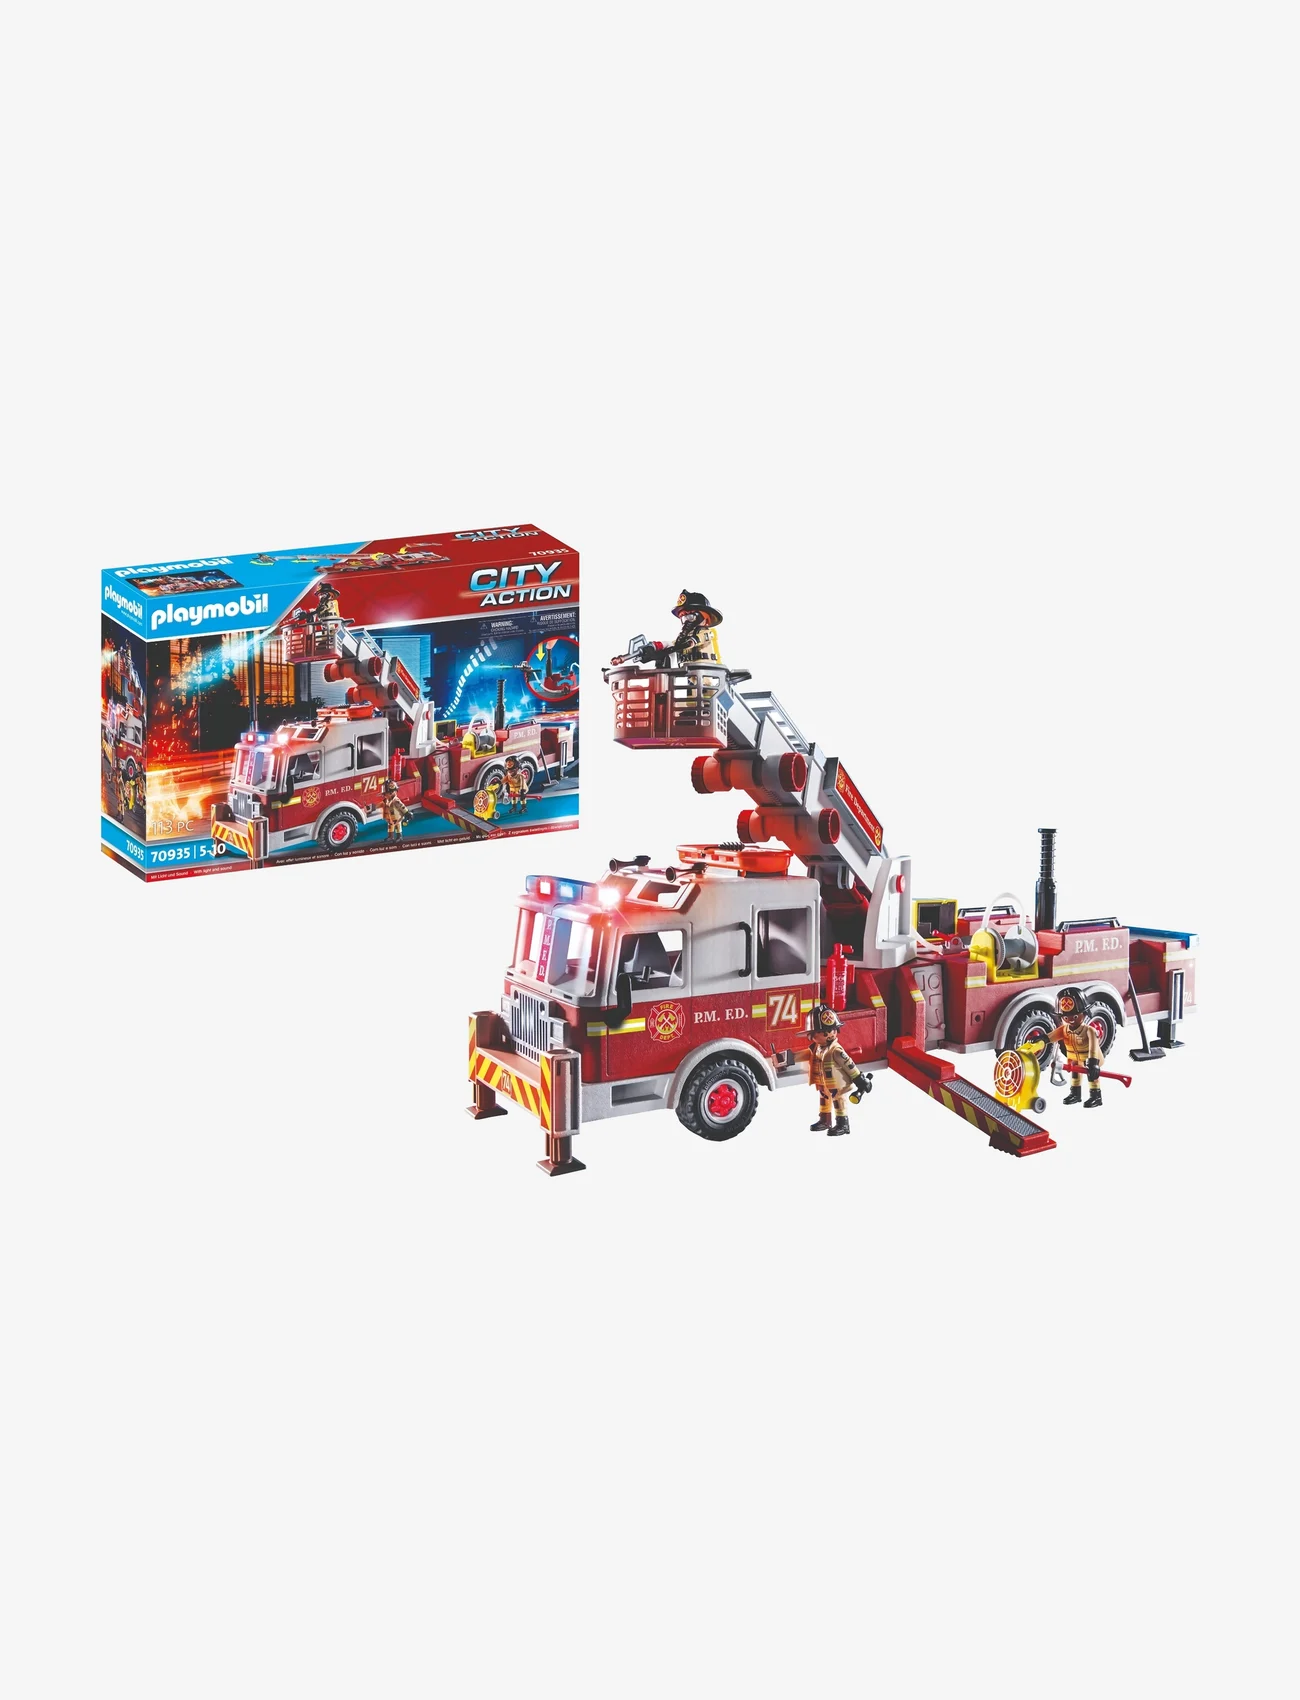 PLAYMOBIL - PLAYMOBIL City Action US Fire Engine with Tower Ladder - 70935 - playmobil city action - multicolored - 0